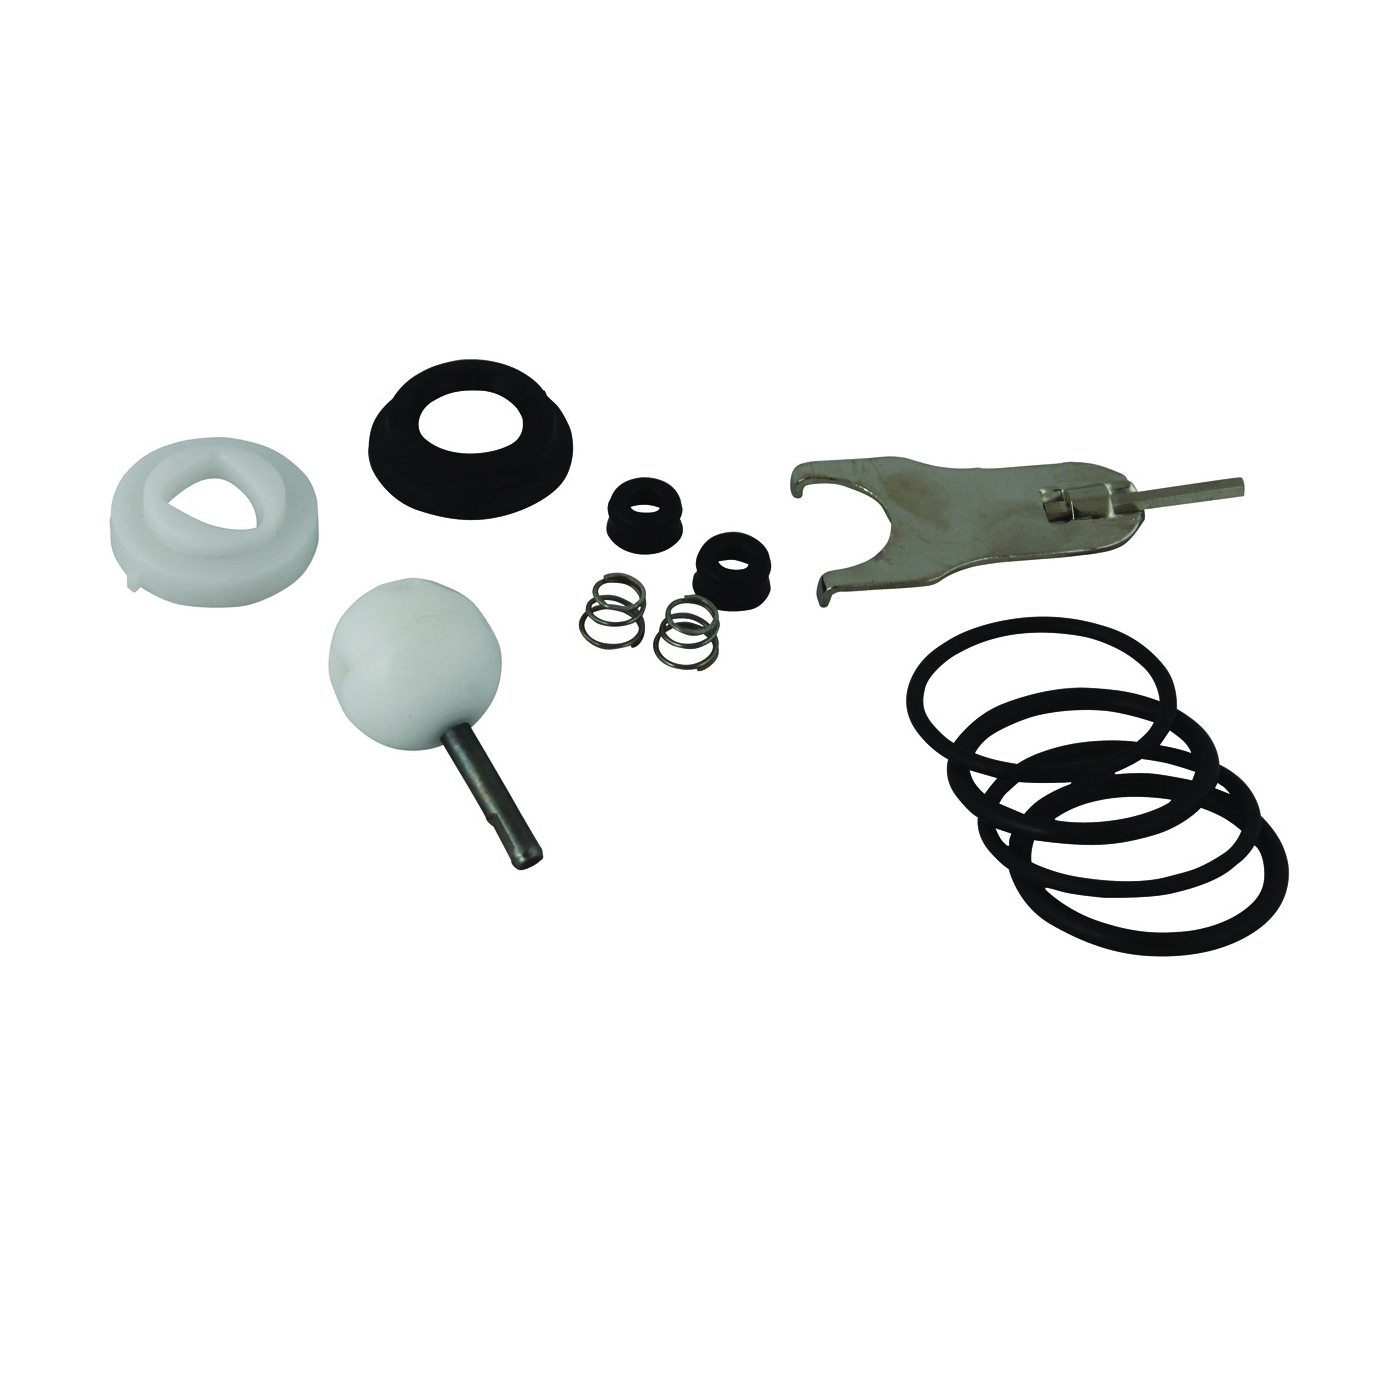 PP808-67 Faucet Repair Kit, For: Delta Single Lever Style Faucets